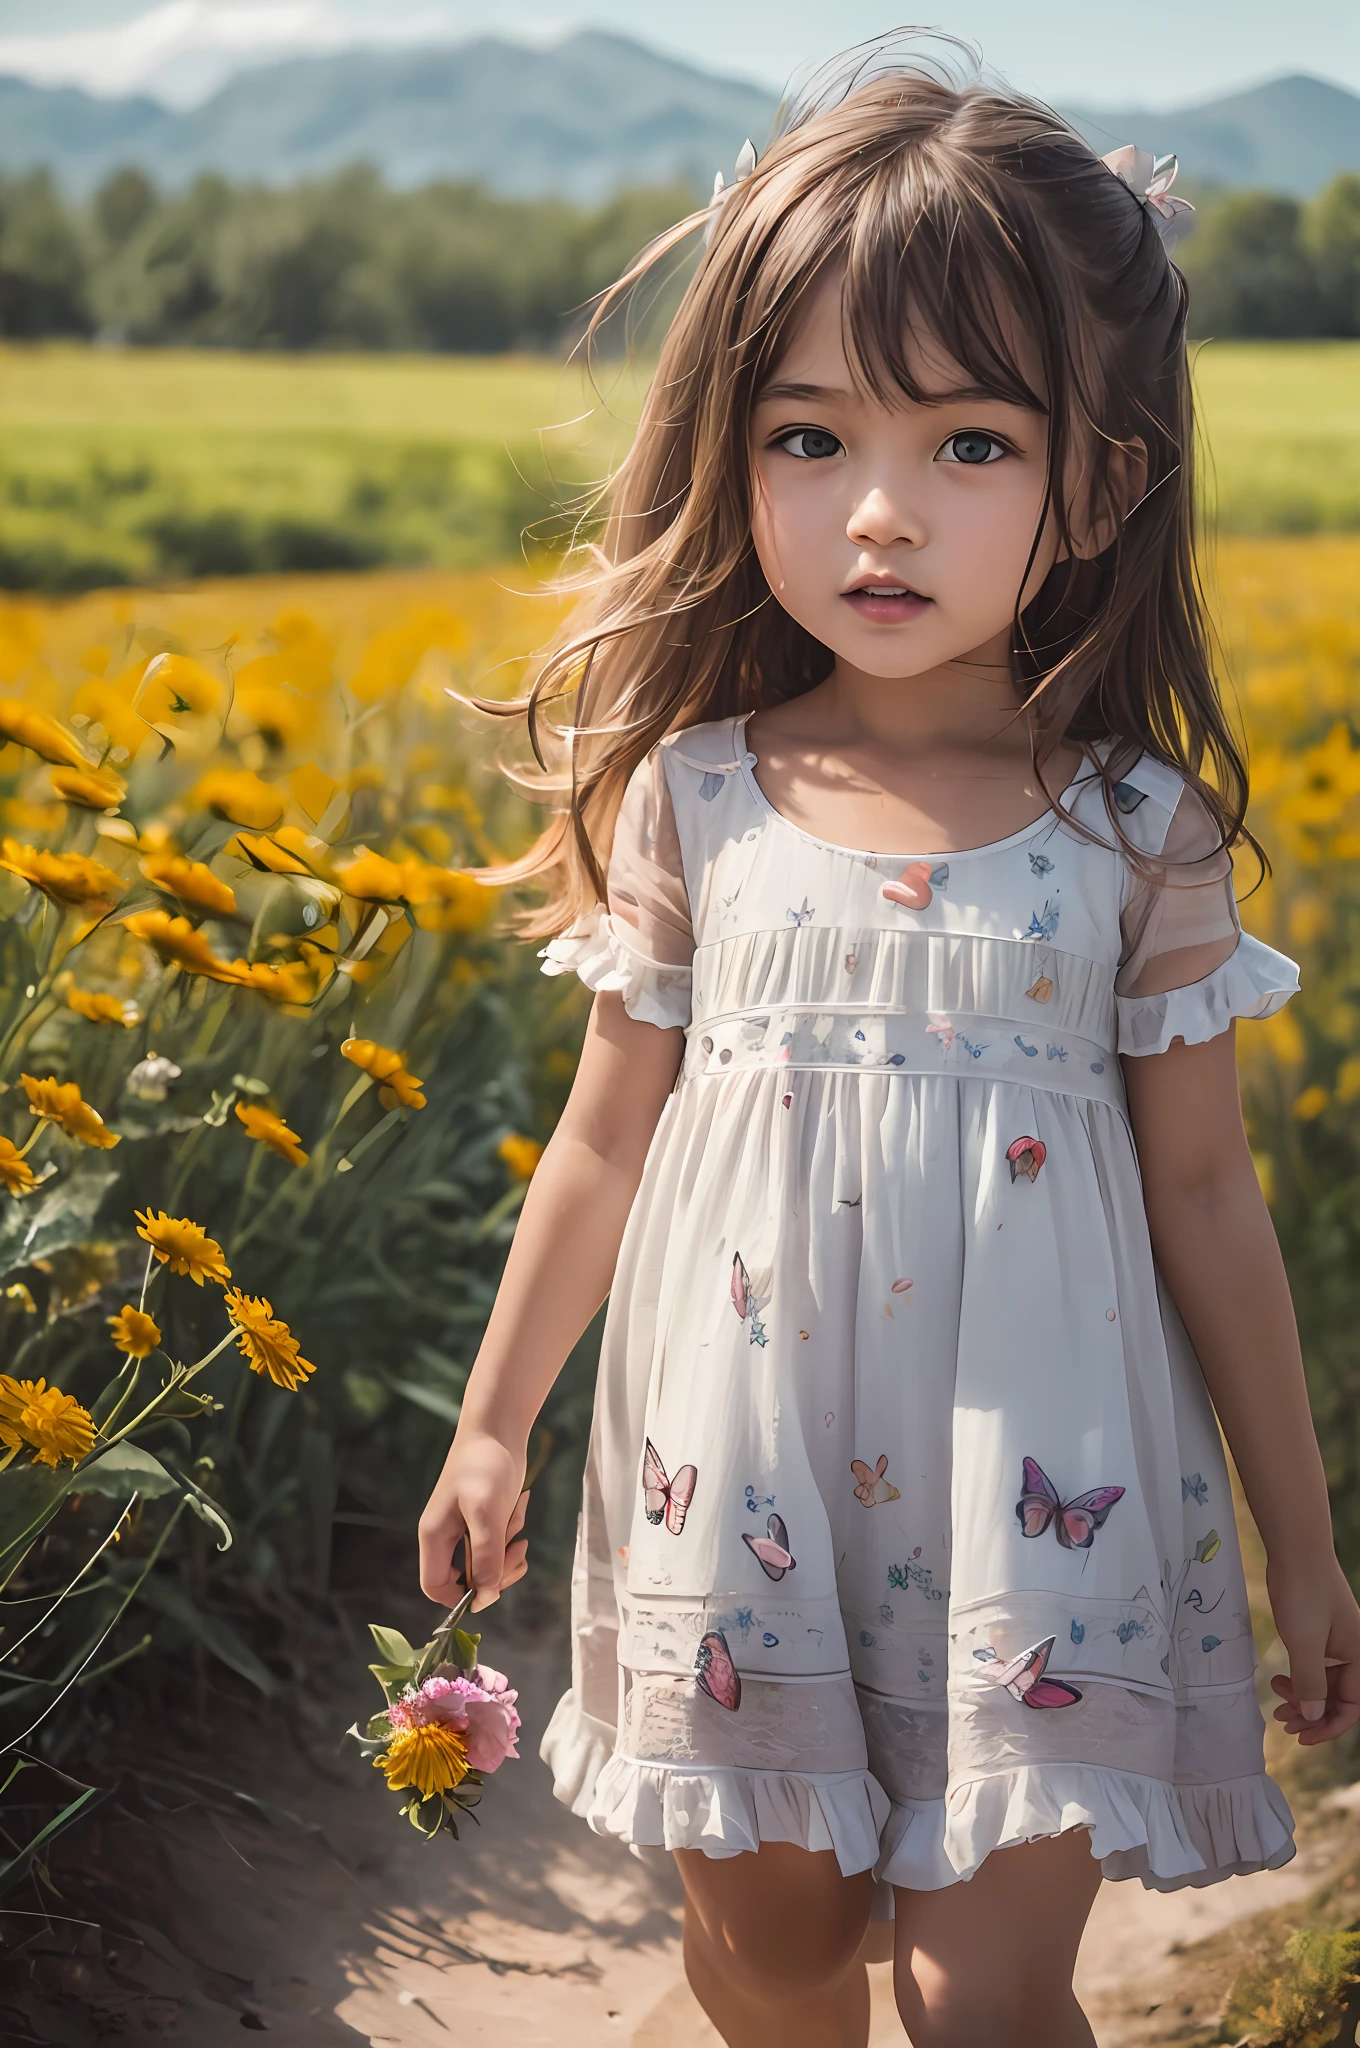 High Detail, Ultra Detail, 8K, Ultra High Resolution A cute and innocent girl, , toddler, enjoying her time in the open field, surrounded by the beauty of nature, warm sun sprinkling on her, wildflowers gently swaying in the breeze. Butterflies and birds flutter around her, adding to the playful atmosphere,